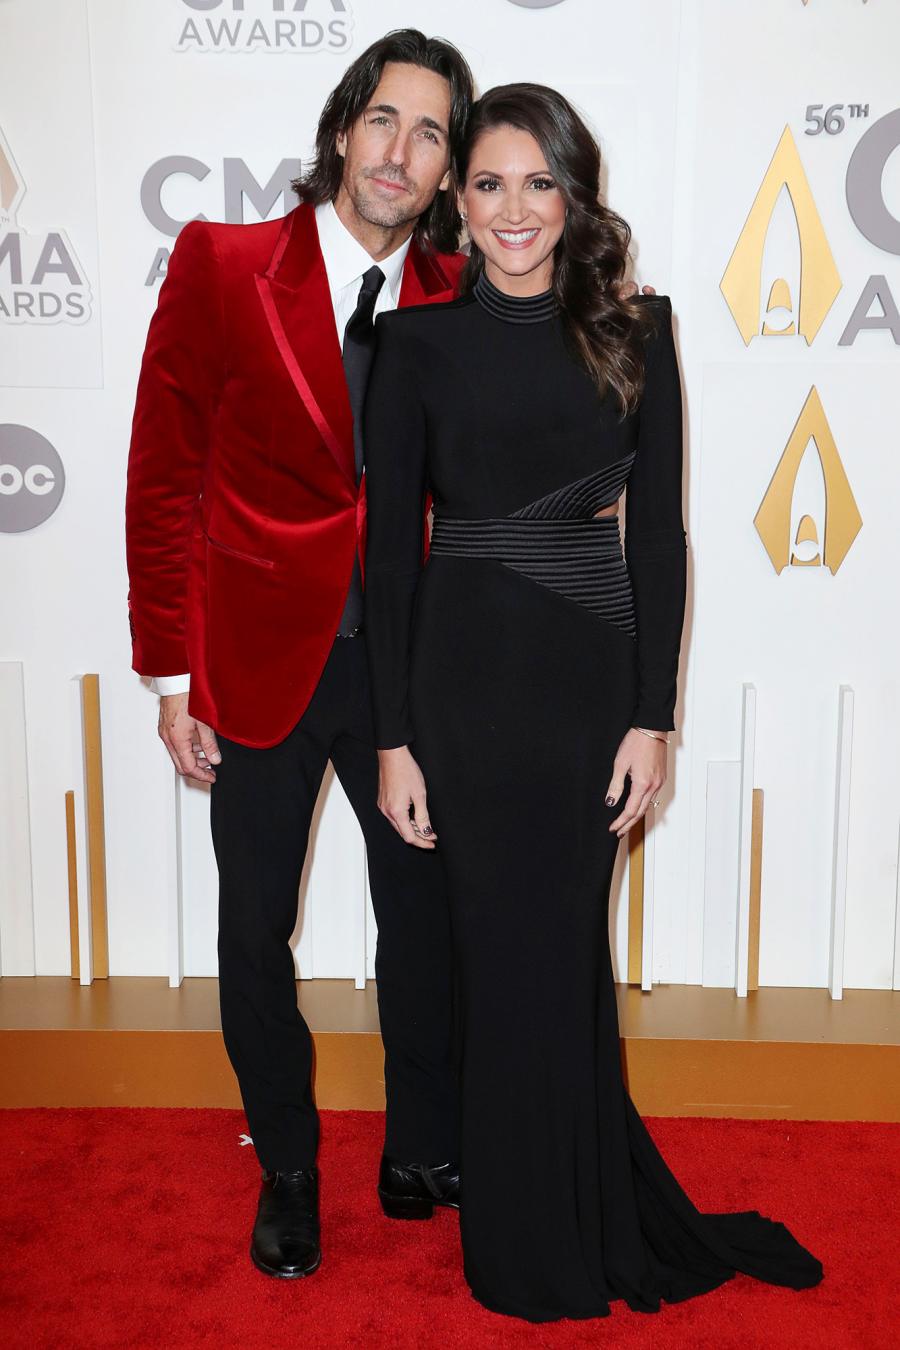 Dynamic Duos! See the Hottest Couples at the CMA Awards 2022 121 56th Annual CMA Awards, Arrivals, Nashville, Tennessee, USA - 09 Nov 2022